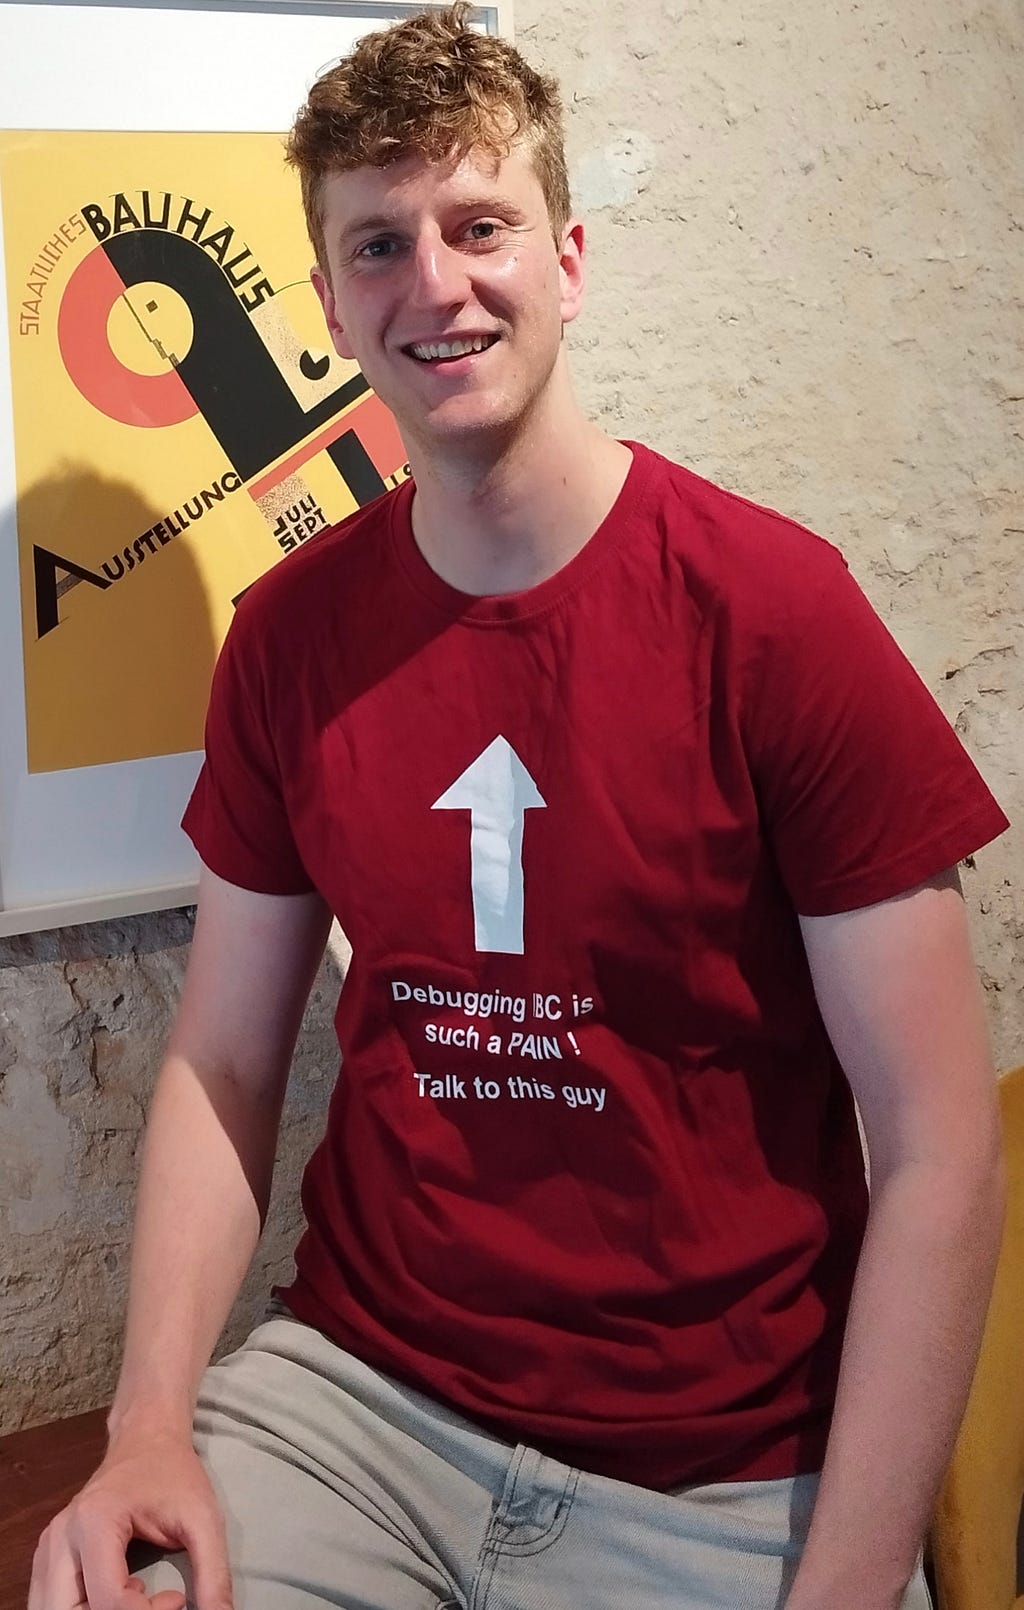 Author of the article wearing a red shirt with the following text : “Debugging IBC is such a Pain ! Talk to this guy” and an arrow from the text to the neck of the t-shirt